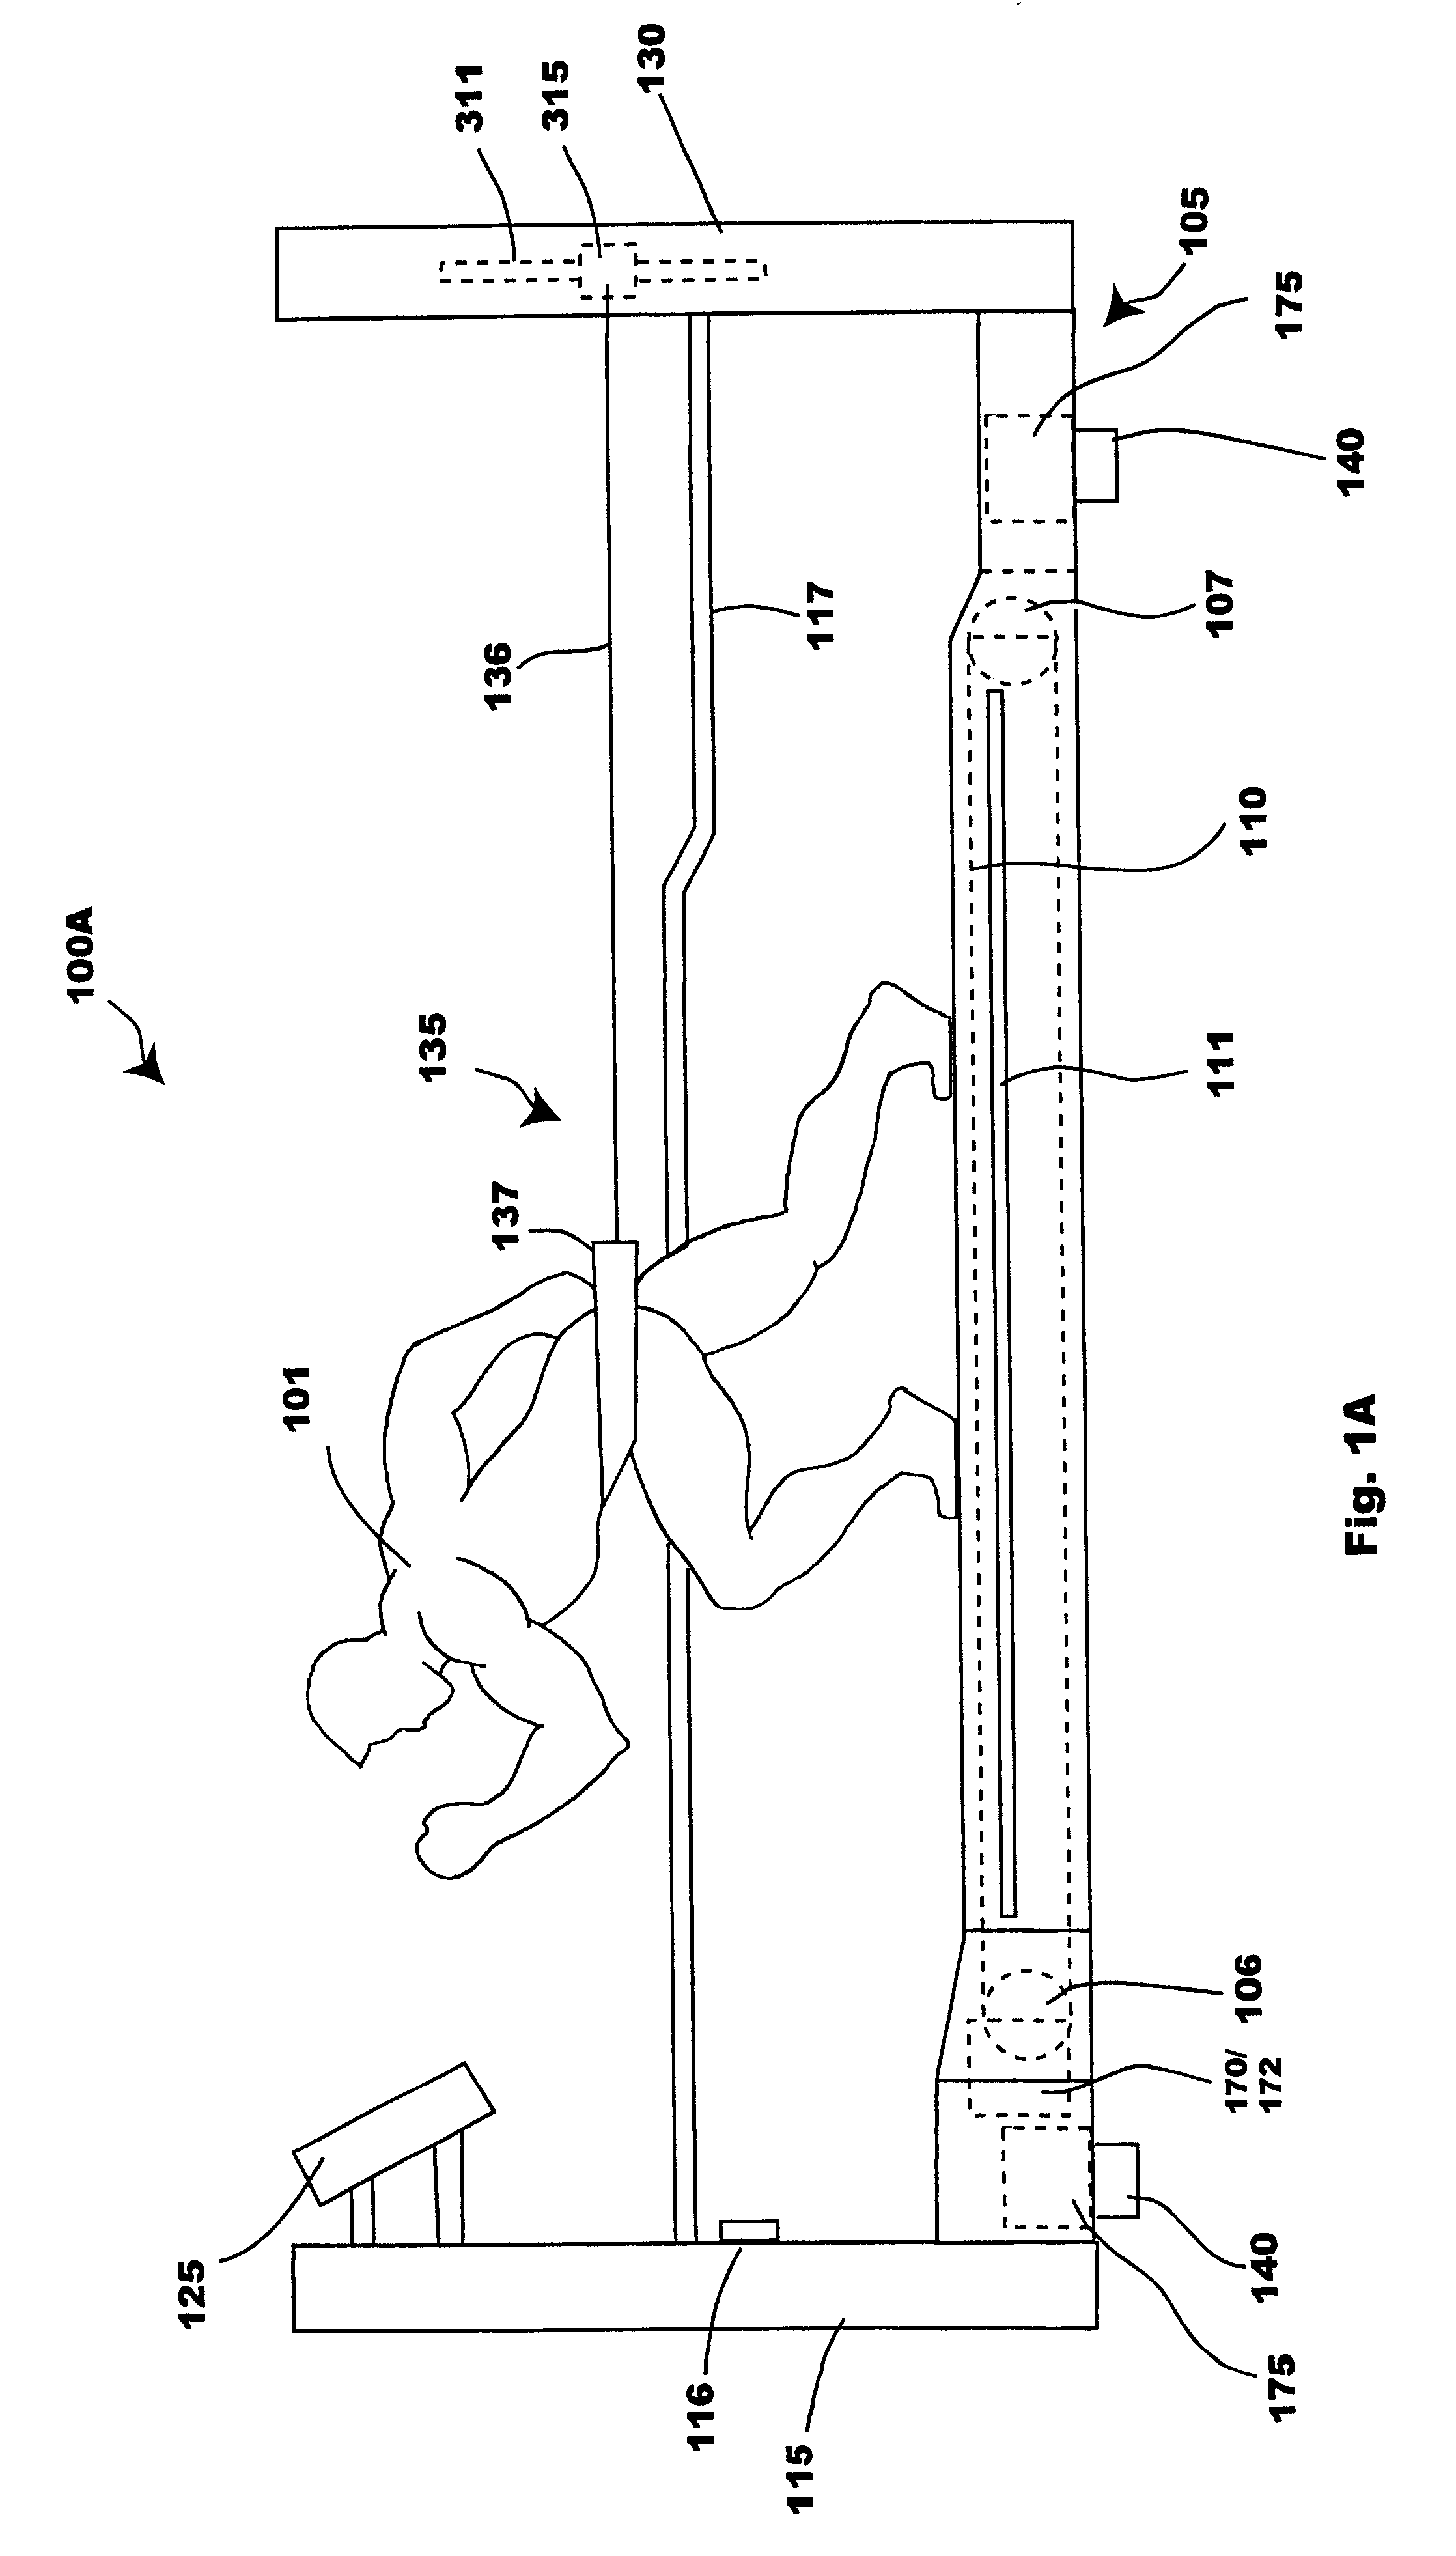 Bipedal locomotion training and performance evaluation device and method